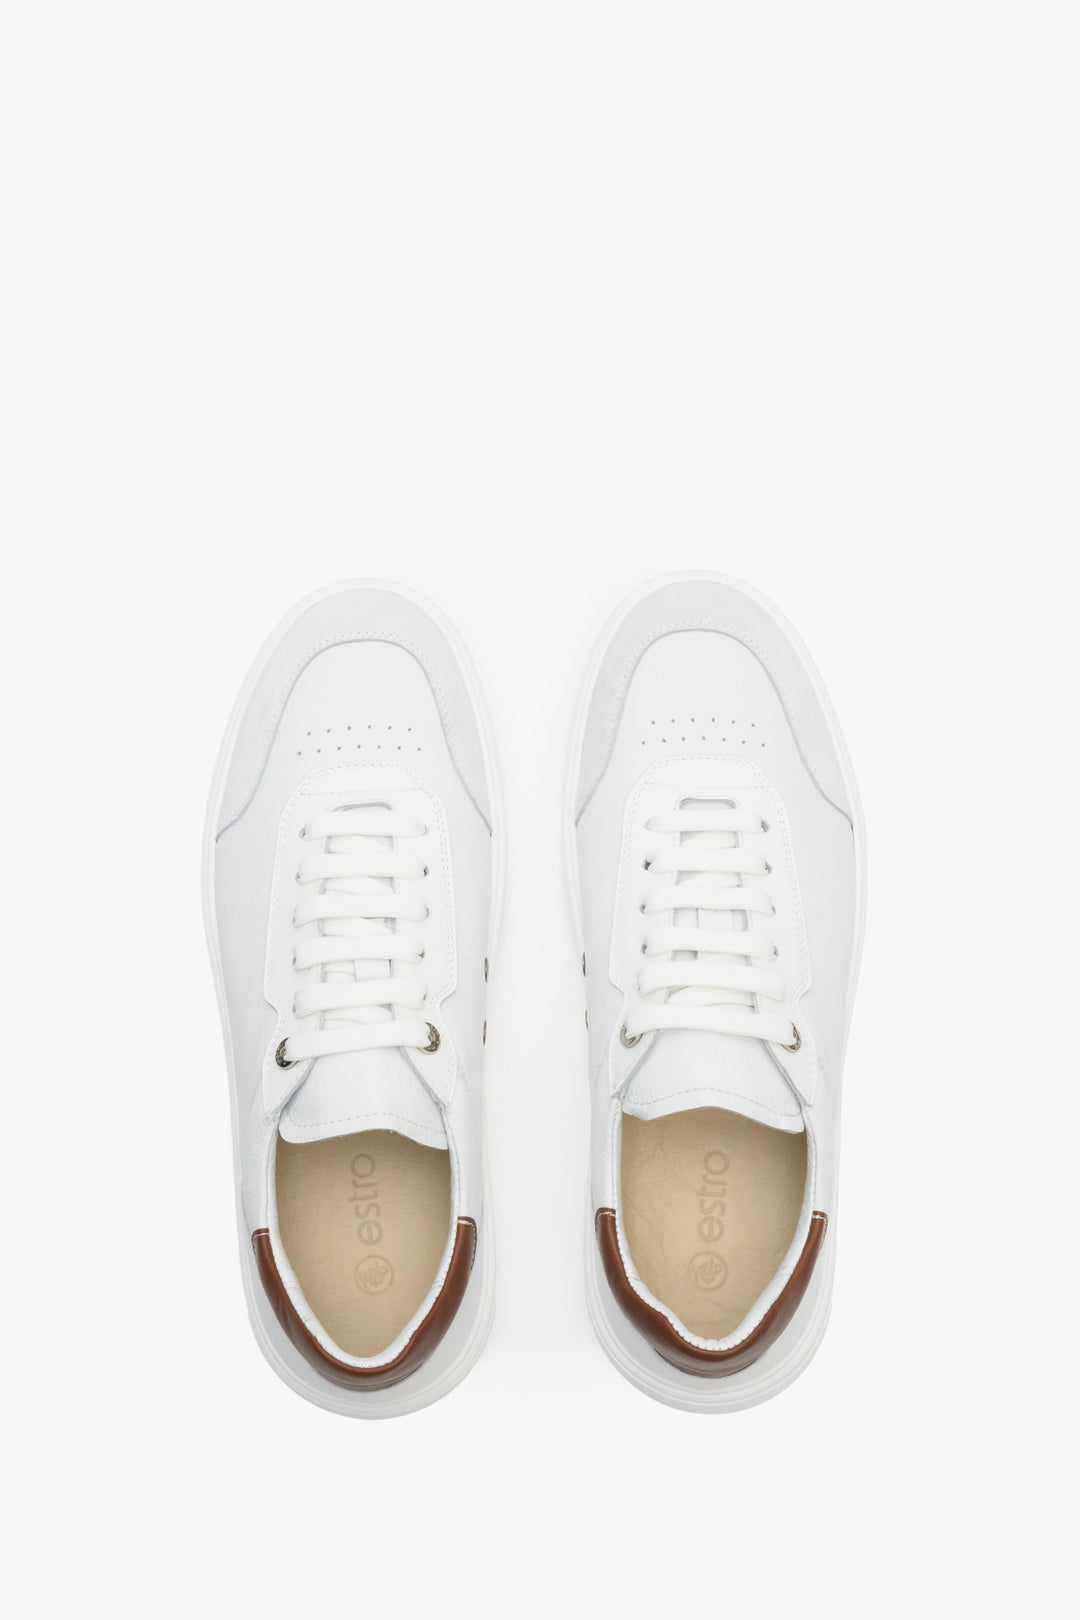 Casual white men's sneakers on an elastic, rubber sole - presentation from above.